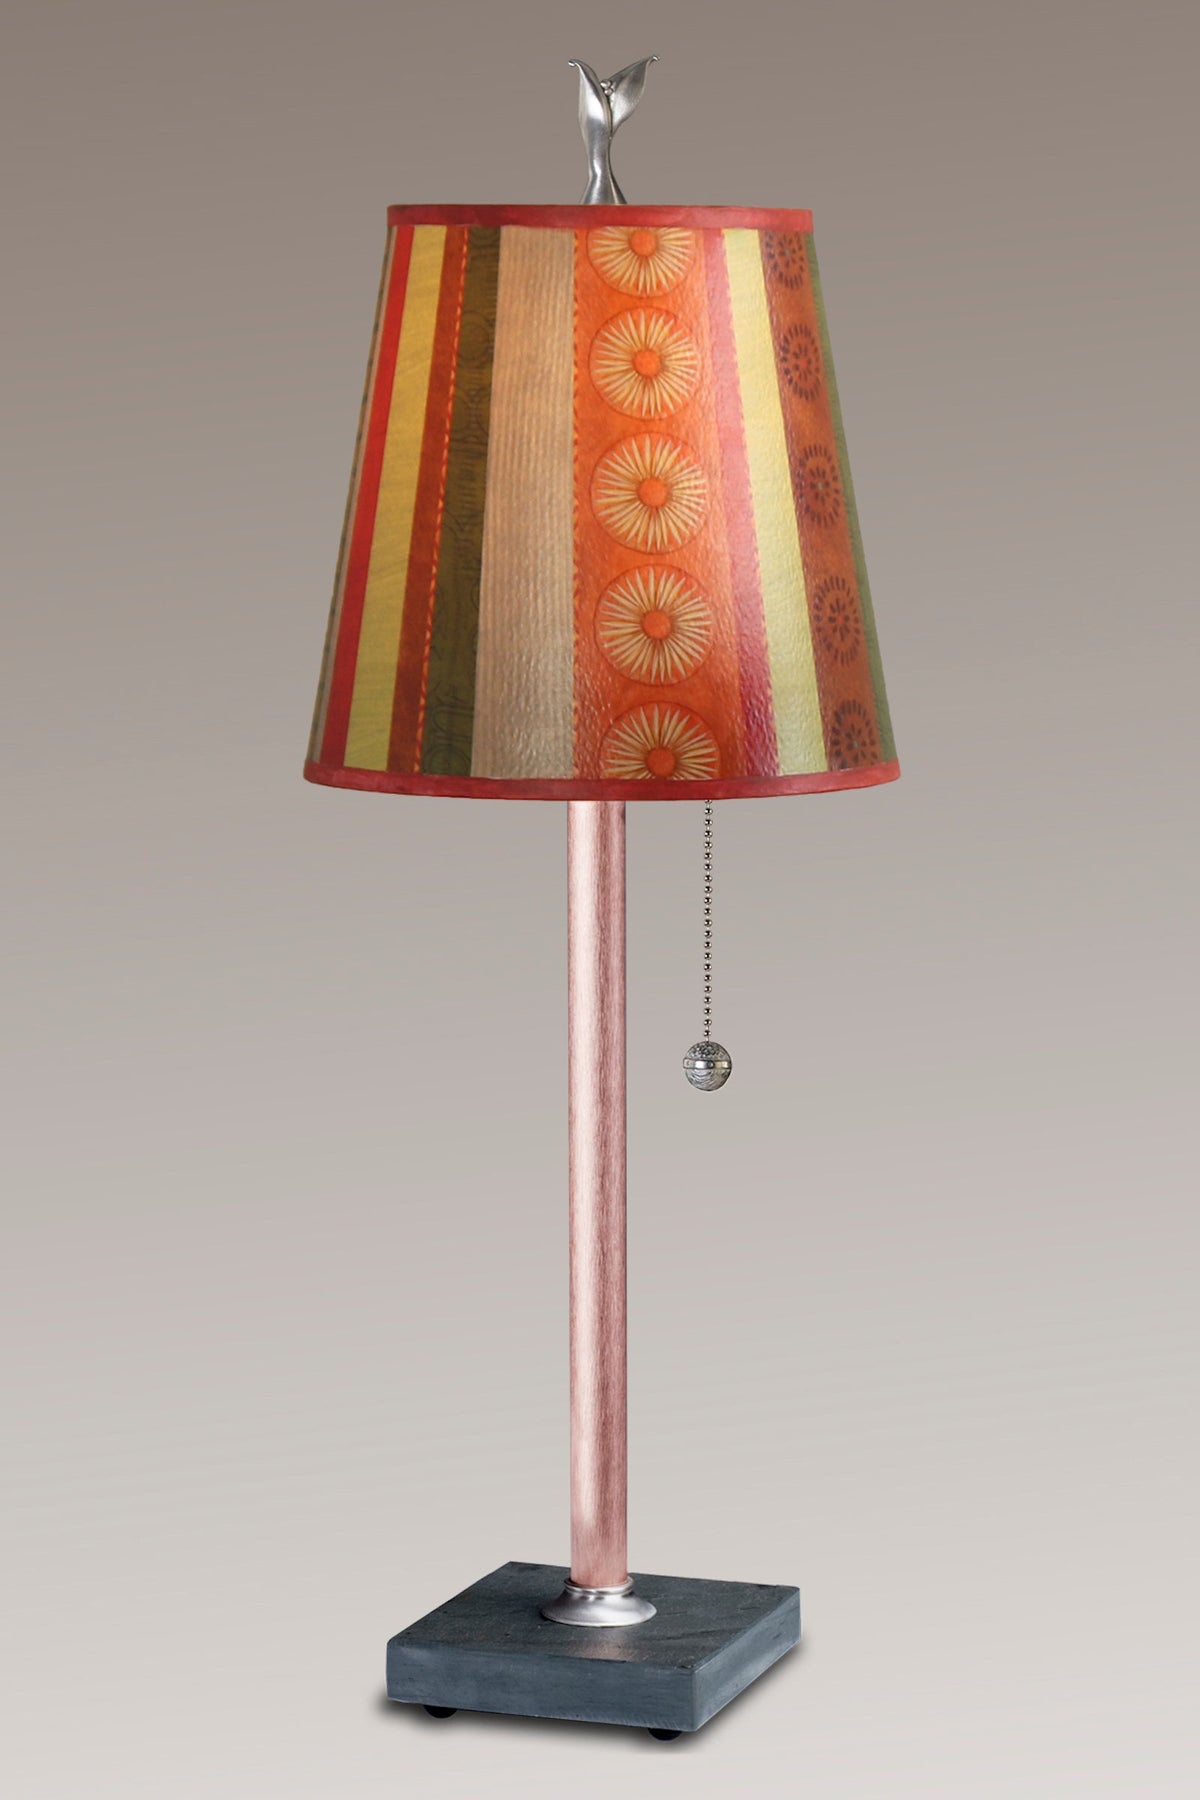 Janna Ugone &amp; Co Table Lamps Copper Table Lamp with Small Drum Shade in Serape